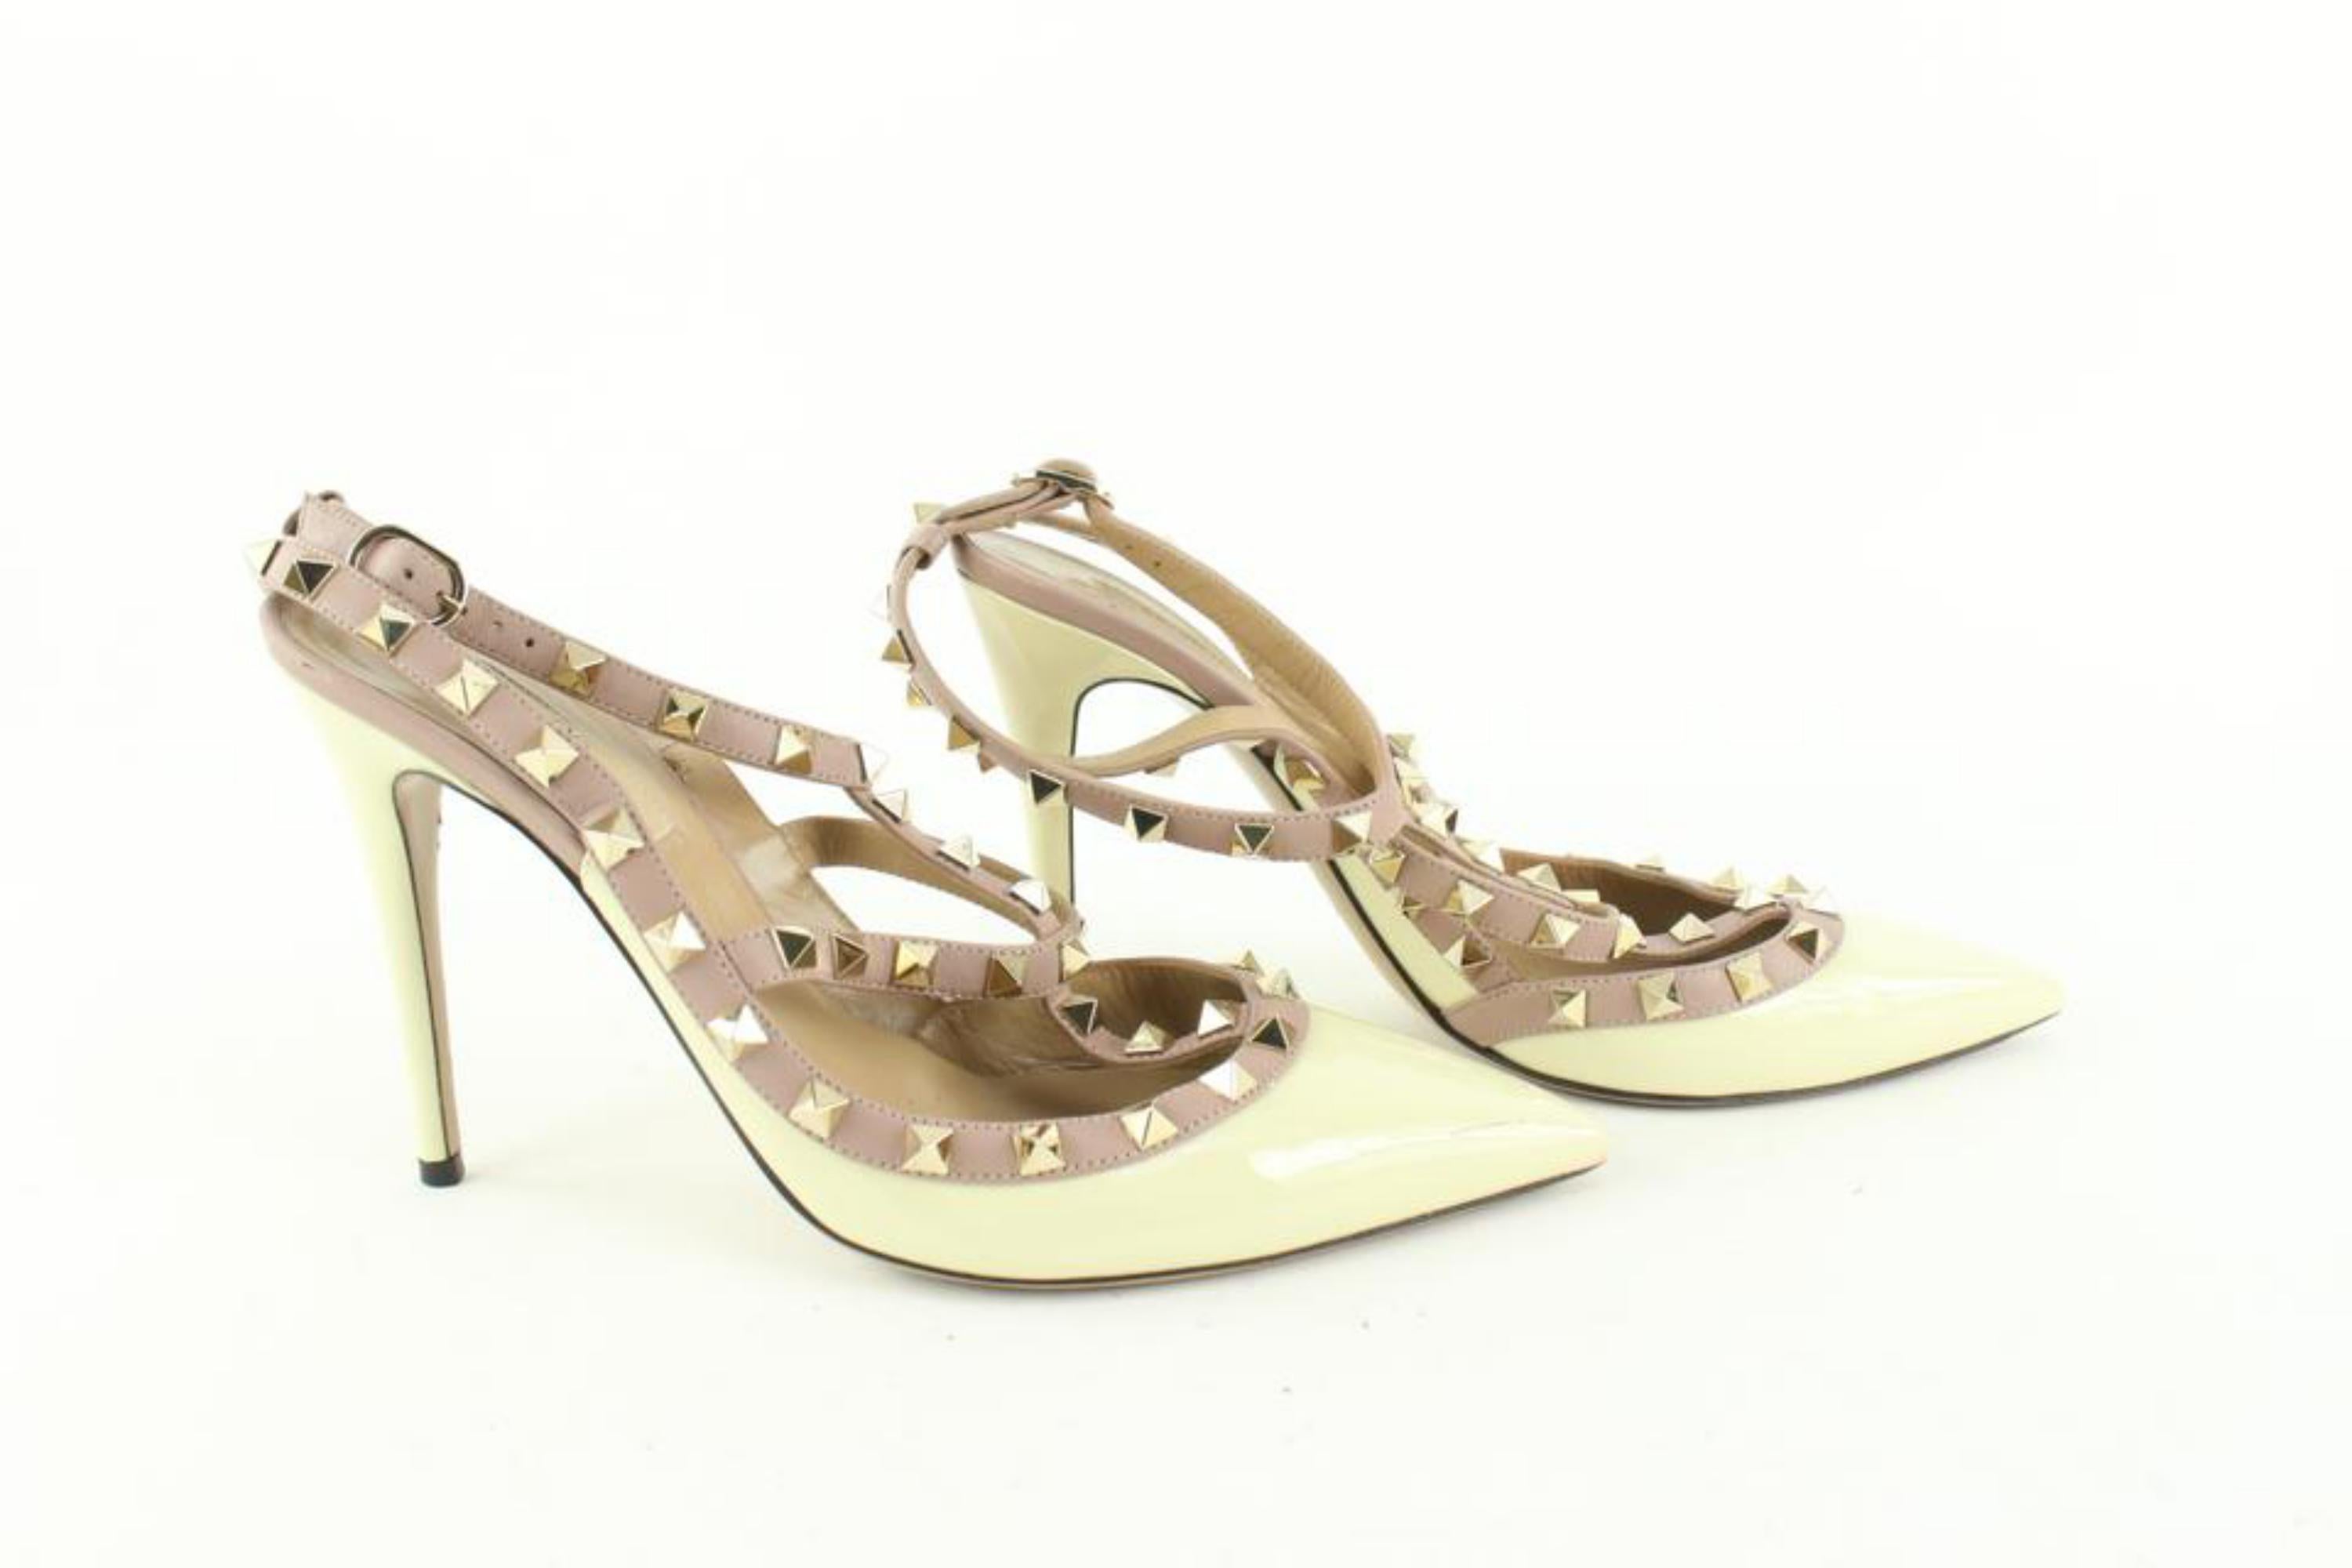 Valentino Ivory x Nude Patent Leather Rockstud Ankle Strap Pump Heels 1223v16
Made In: Italy
Measurements: Length:  10.2